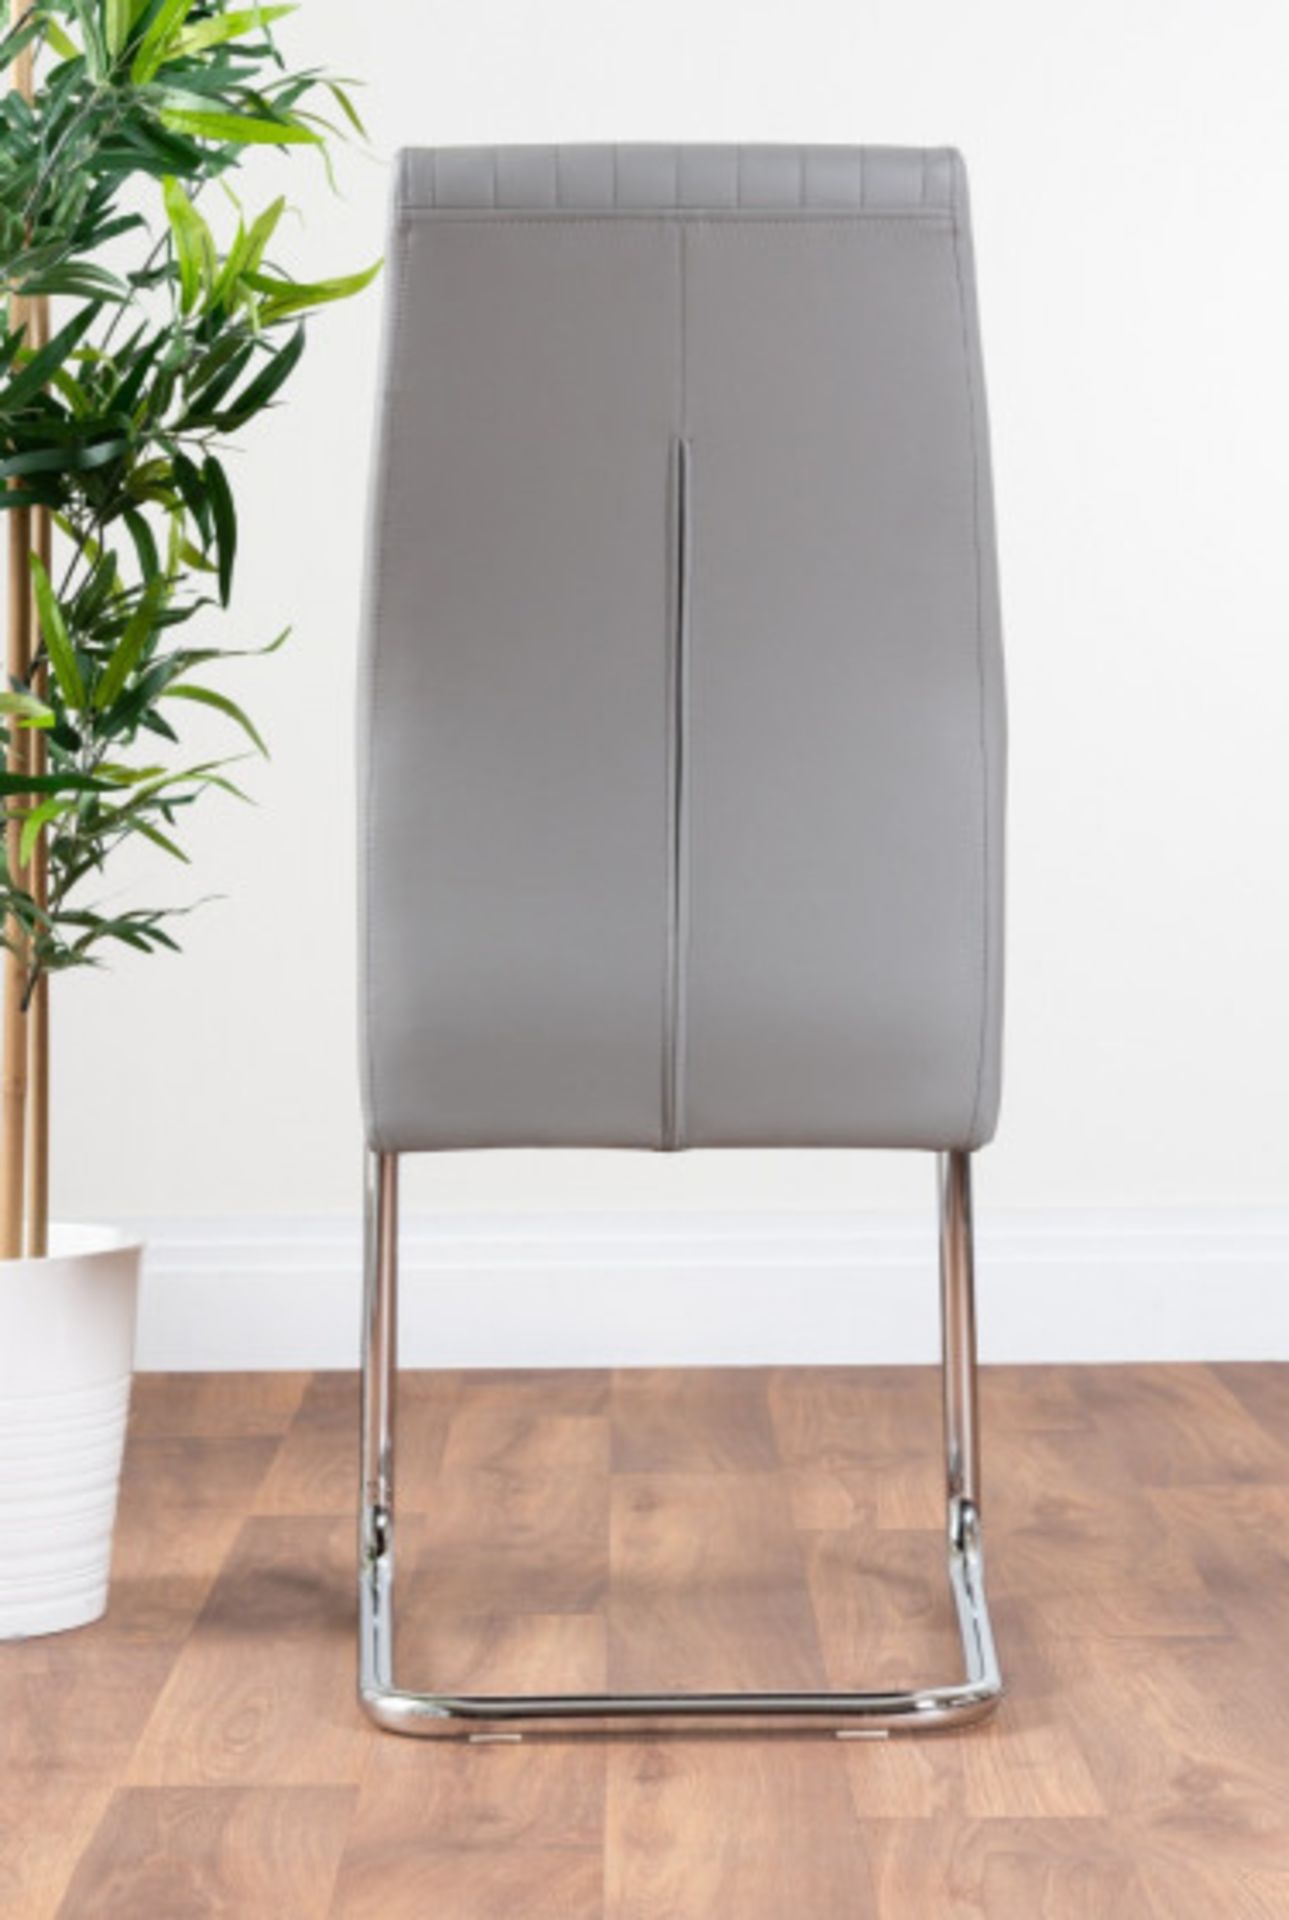 2x Lorenzo Modern Elephant Grey Faux Leather Chrome Dining Chairs - RRP £119.99. - Image 4 of 4